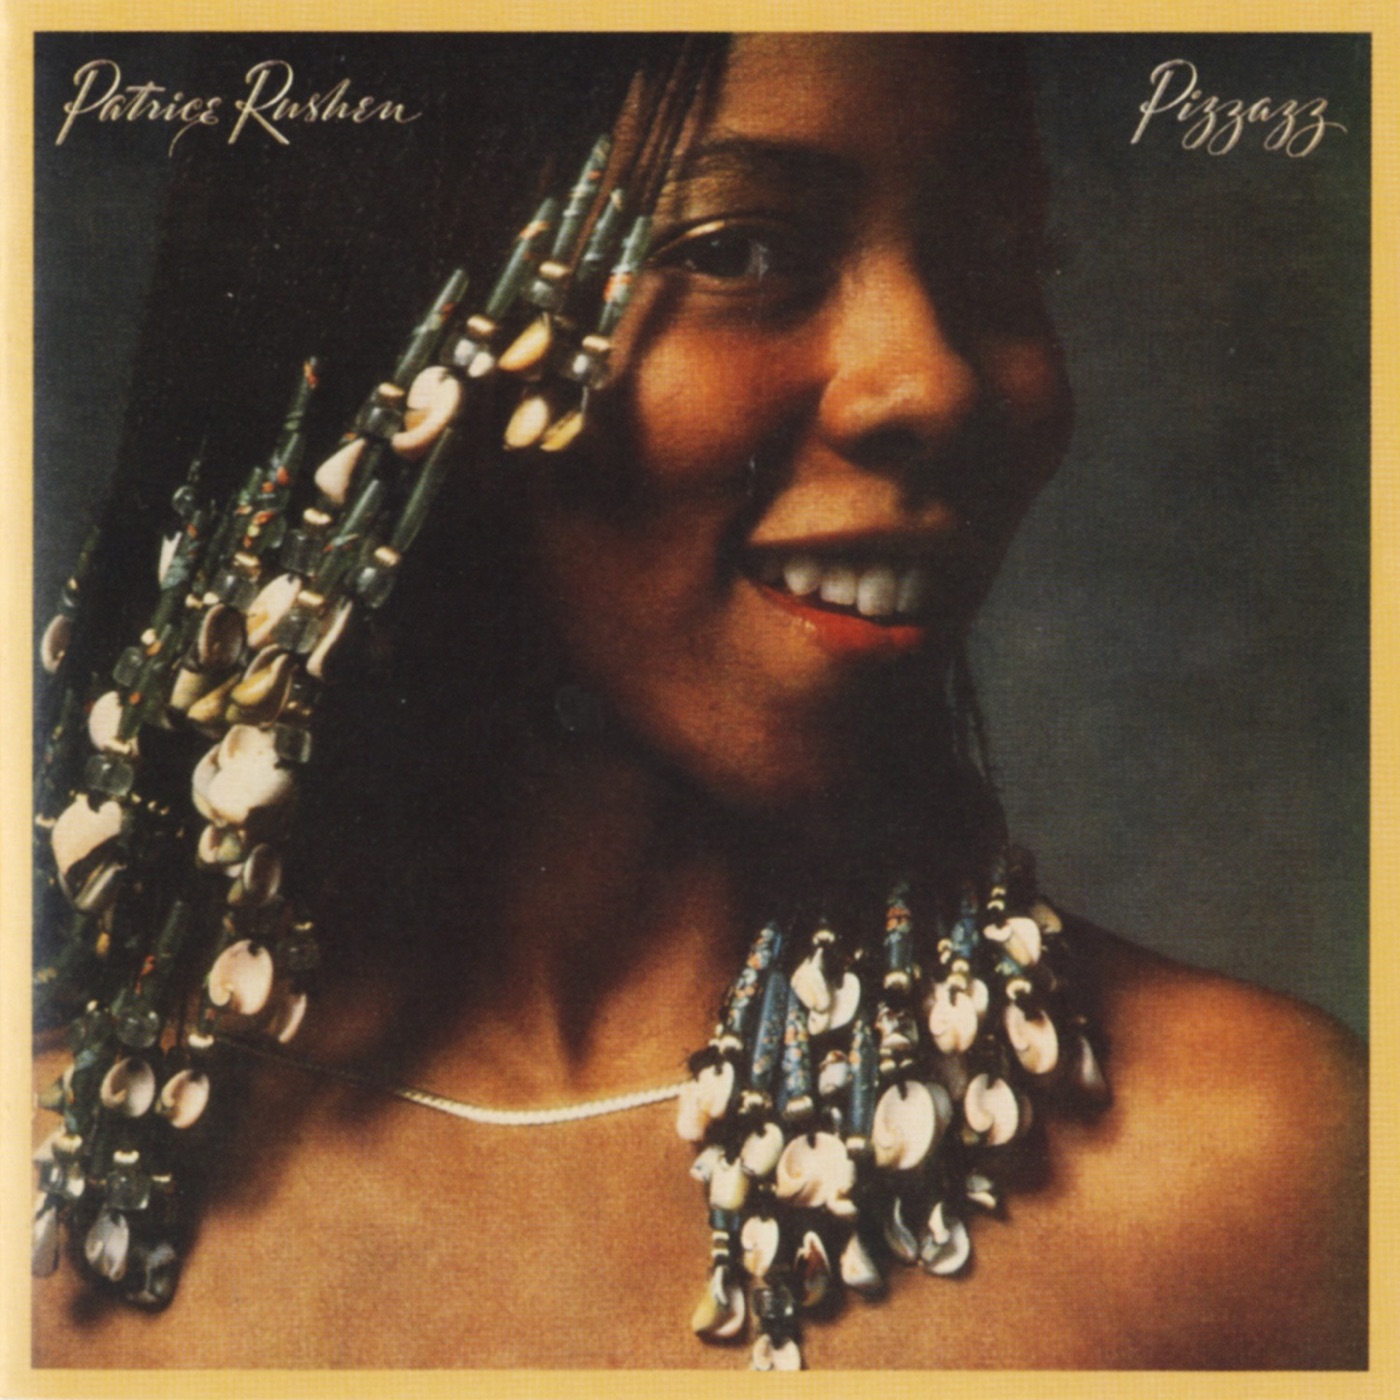 Pizzazz by Patrice Rushen